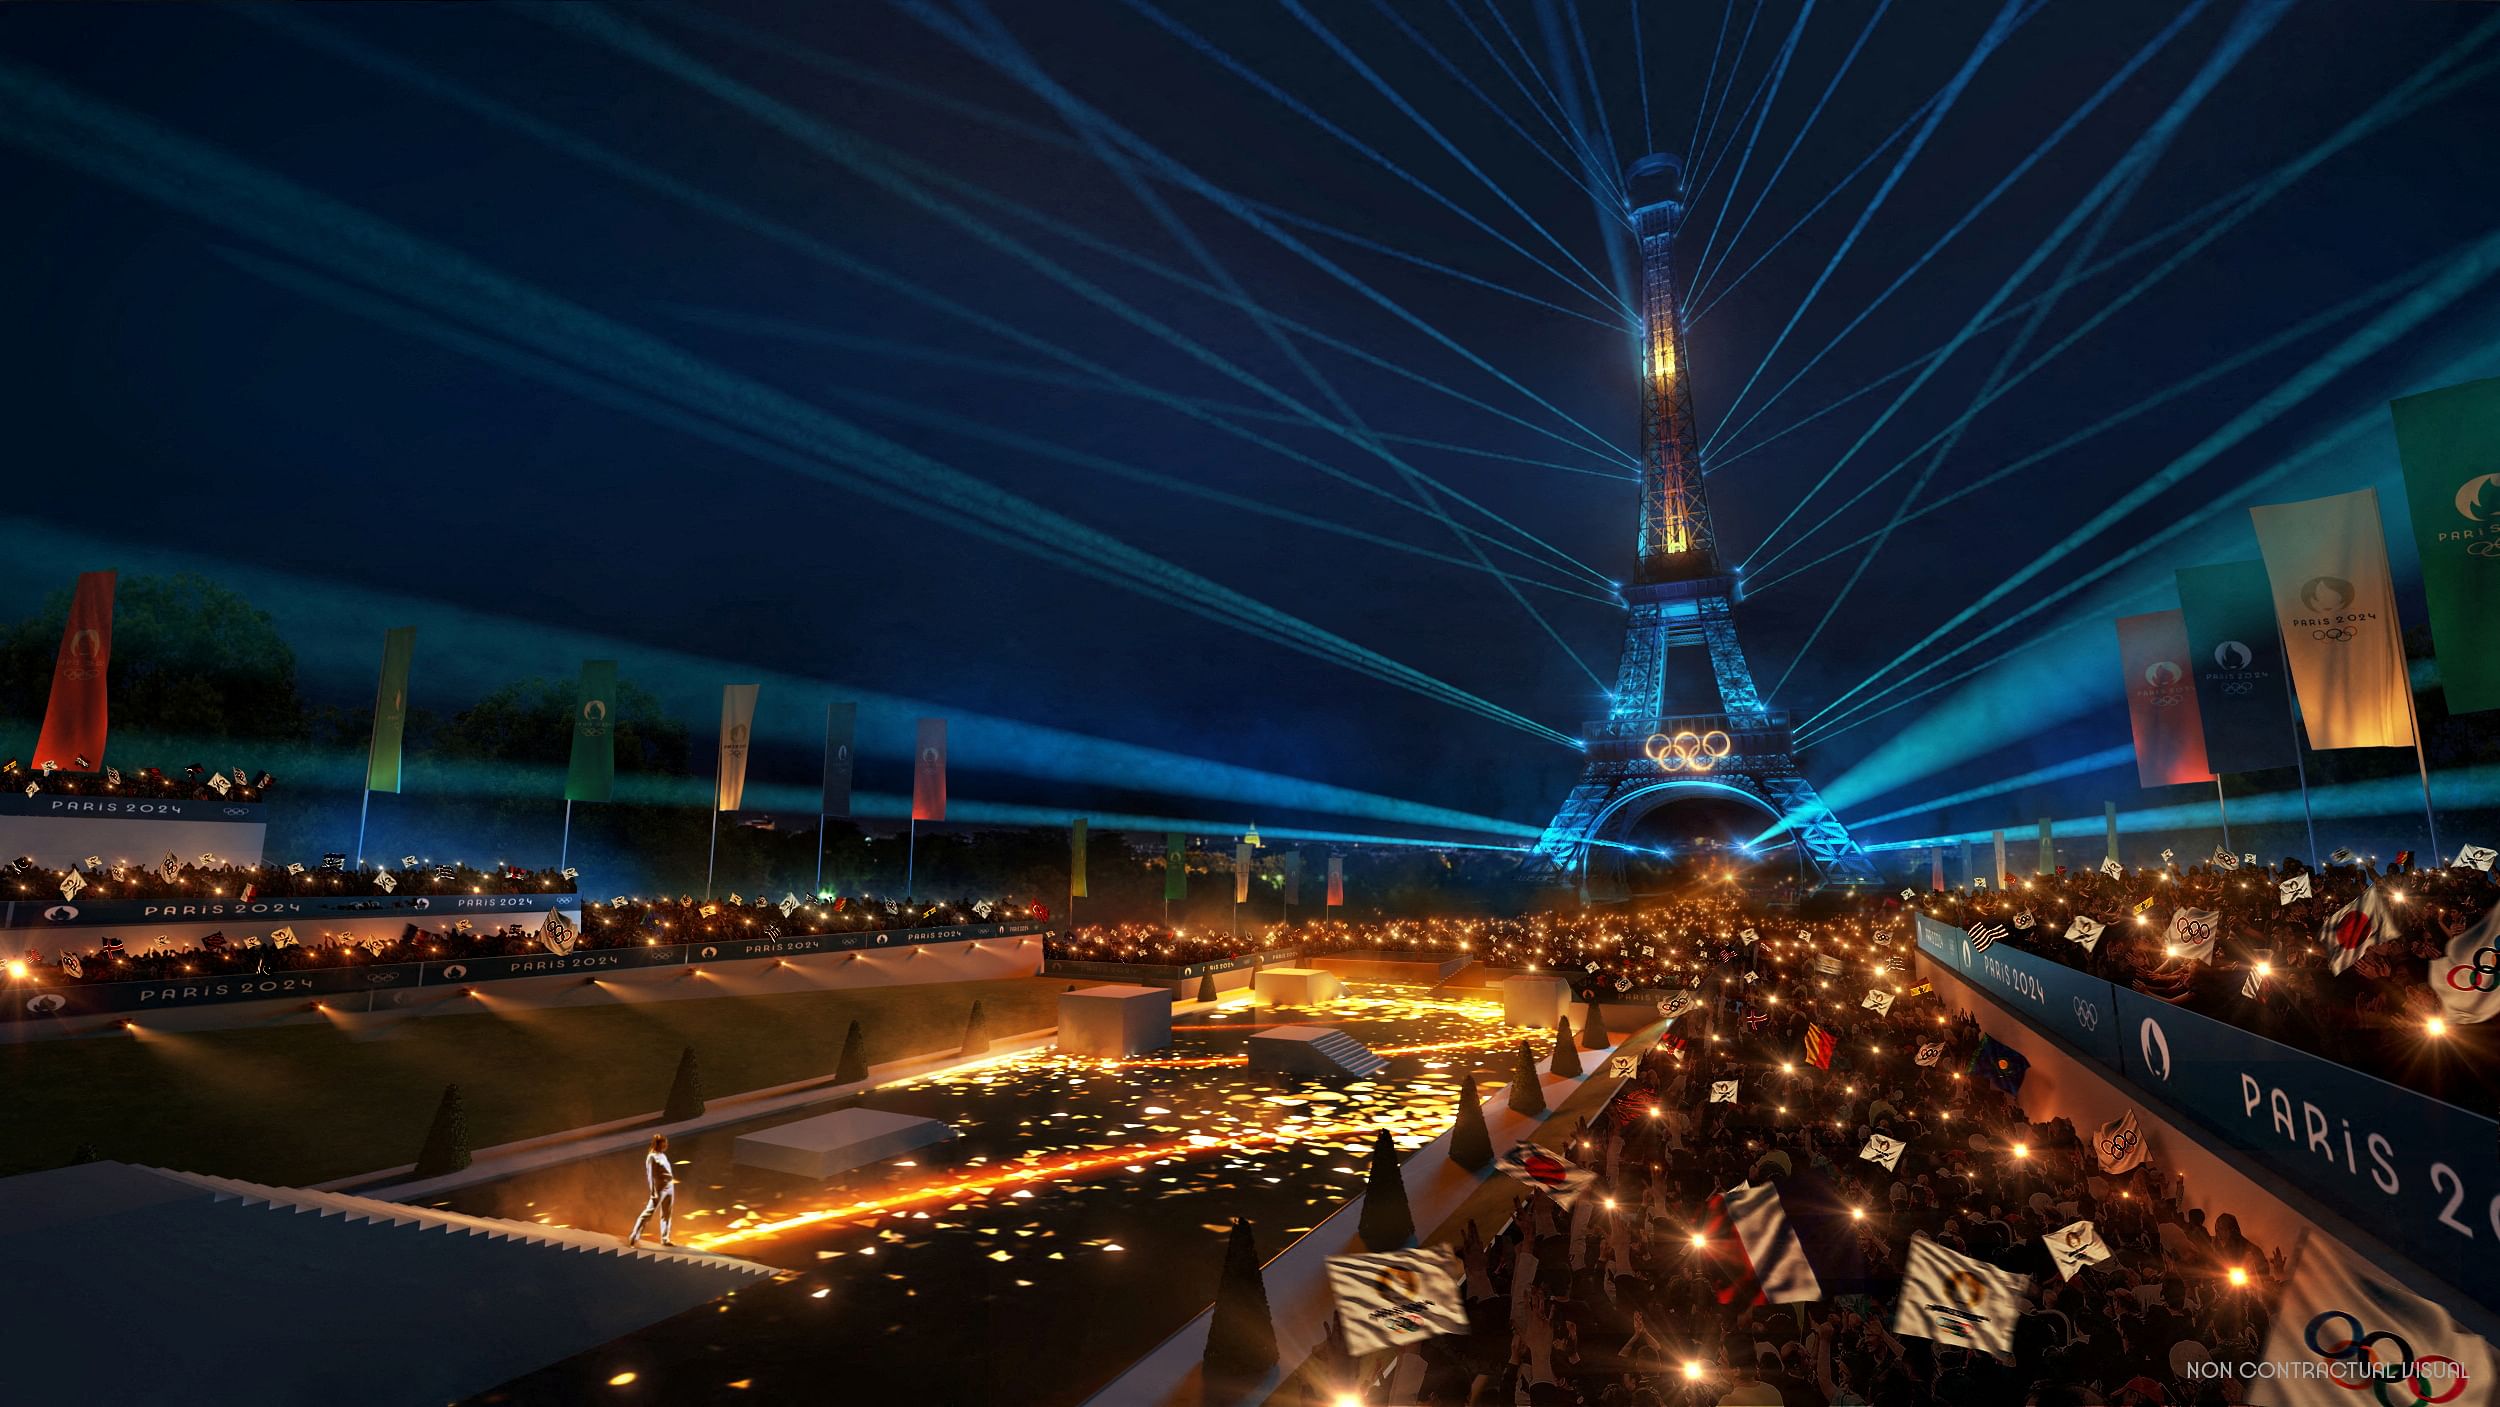 Winter Olympics Paris 2024 to be 'light at the end of the tunnel' says